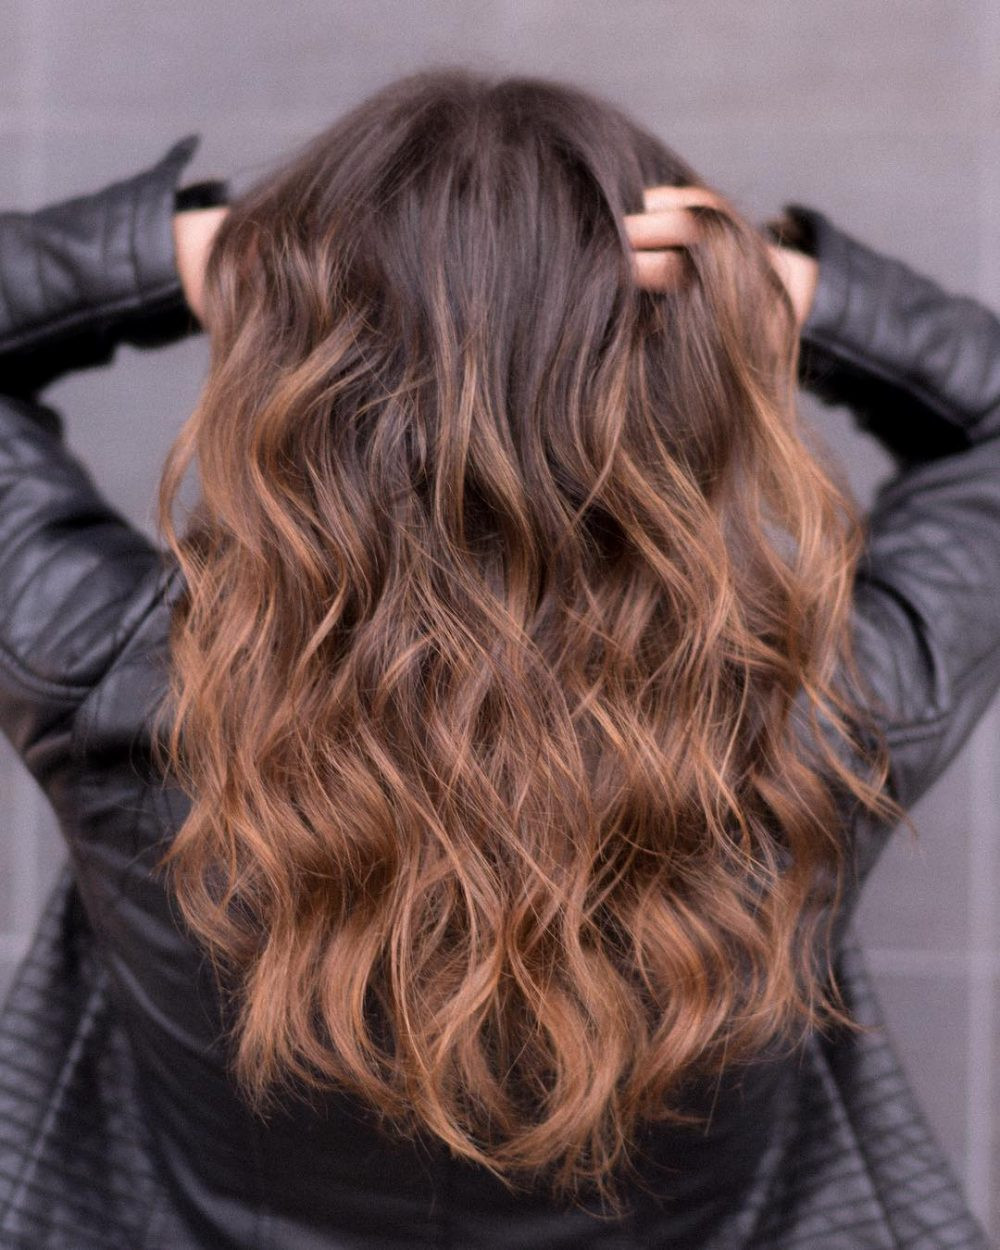 Long Brown Hairstyles
 34 Hottest Long Brown Hair Ideas for Women in 2019